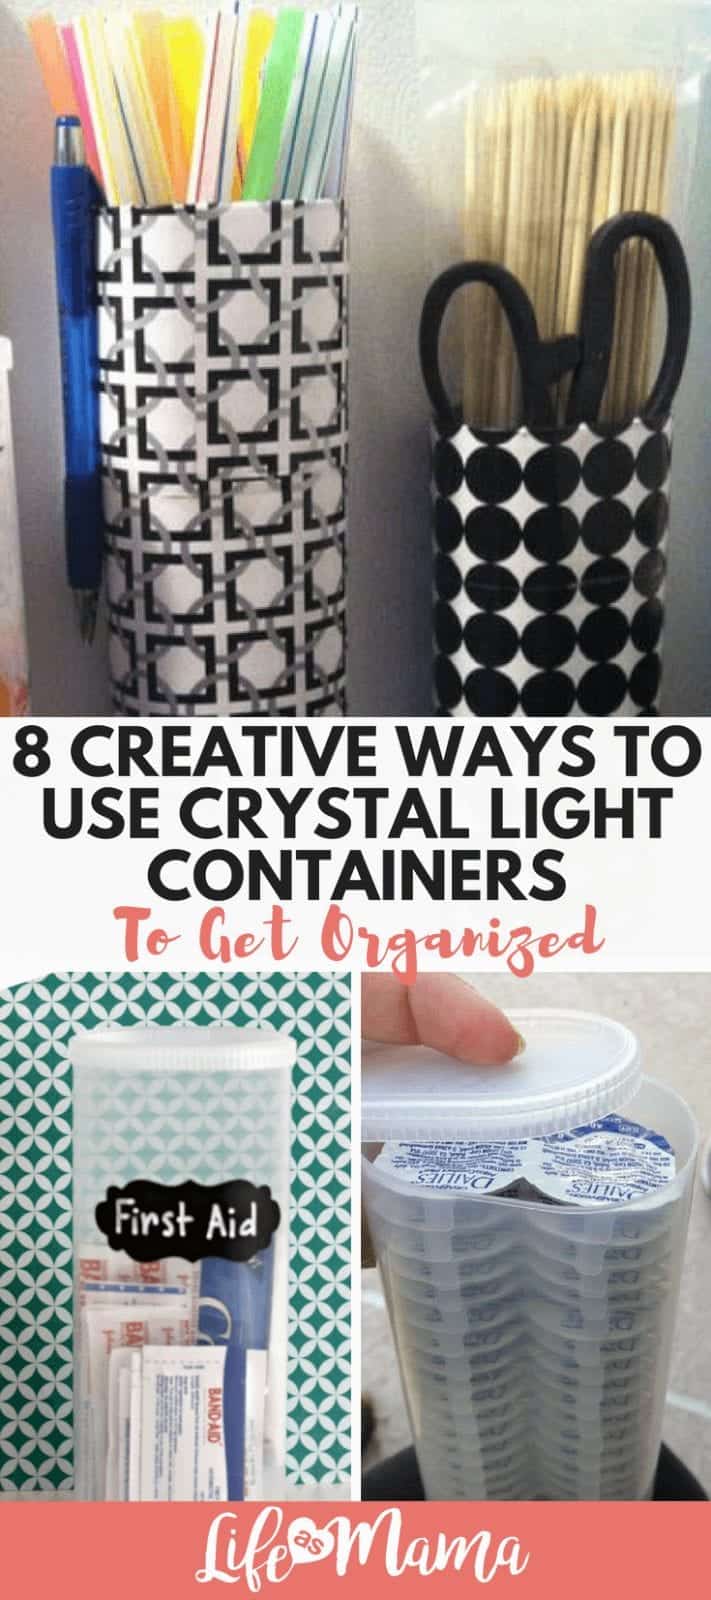 8 Creative Ways To Use Crystal Light Containers To Get Organized